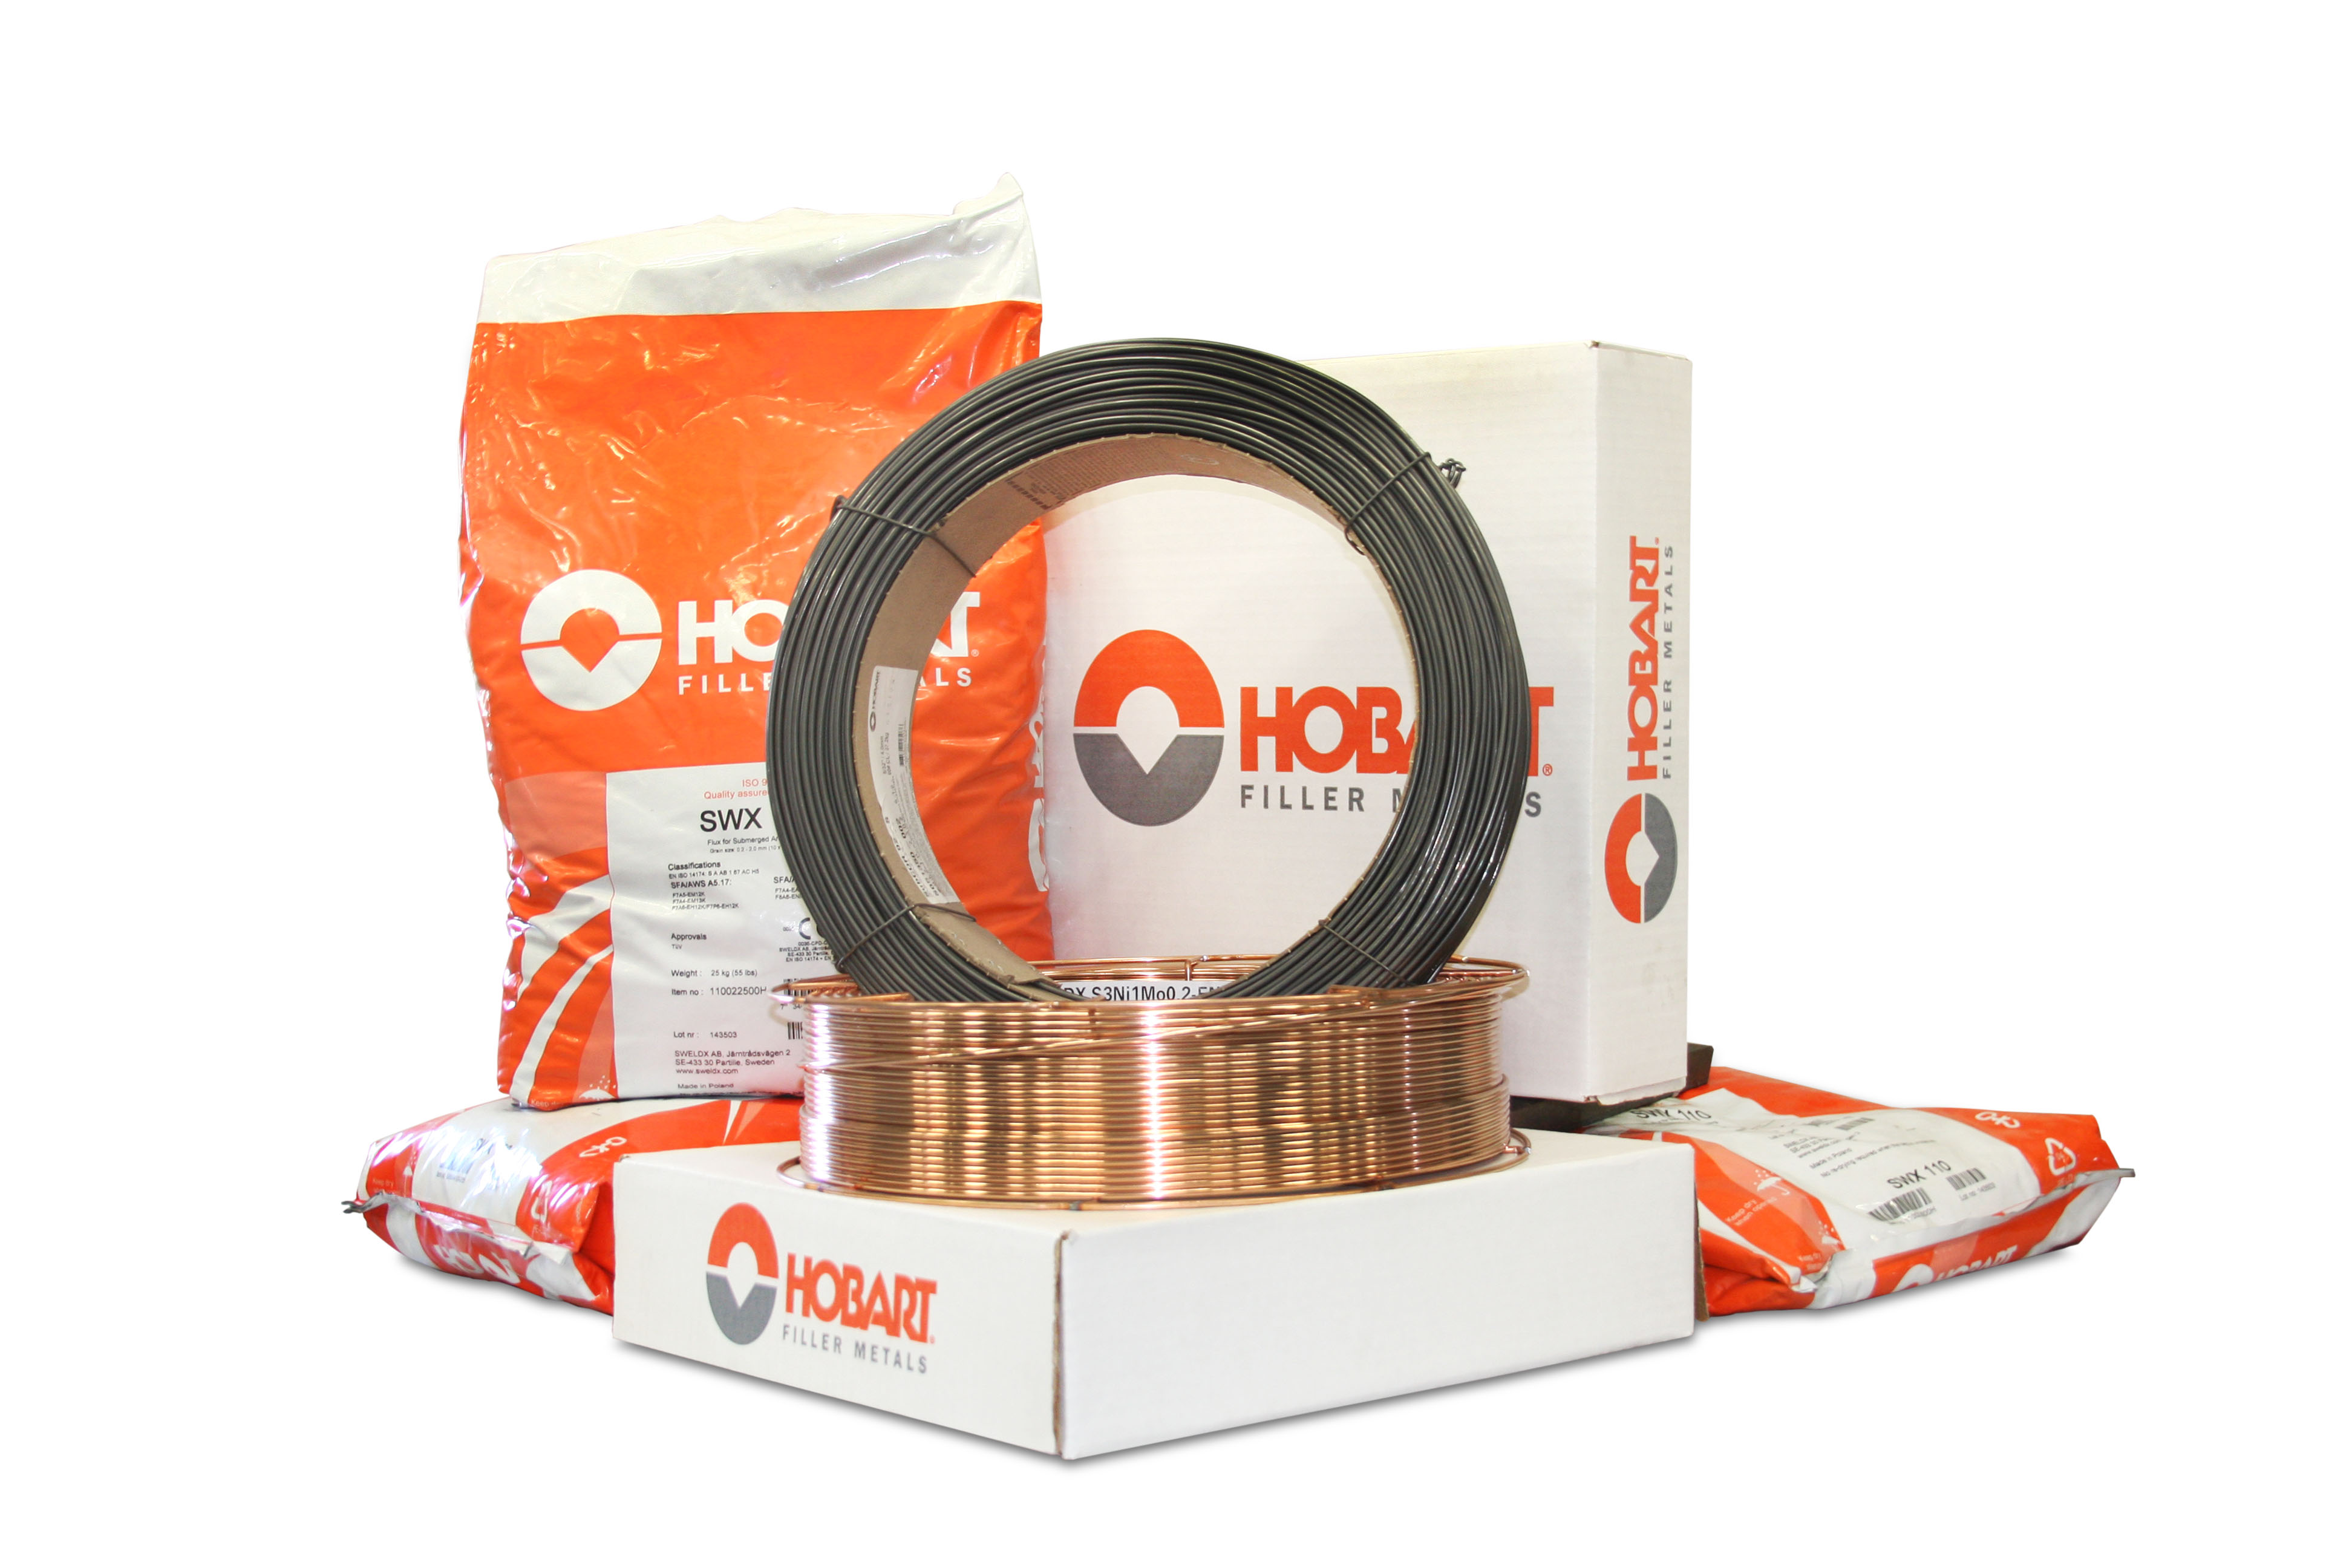 Hobart Submerged arc welding wires and flux in and out of it's packaging.